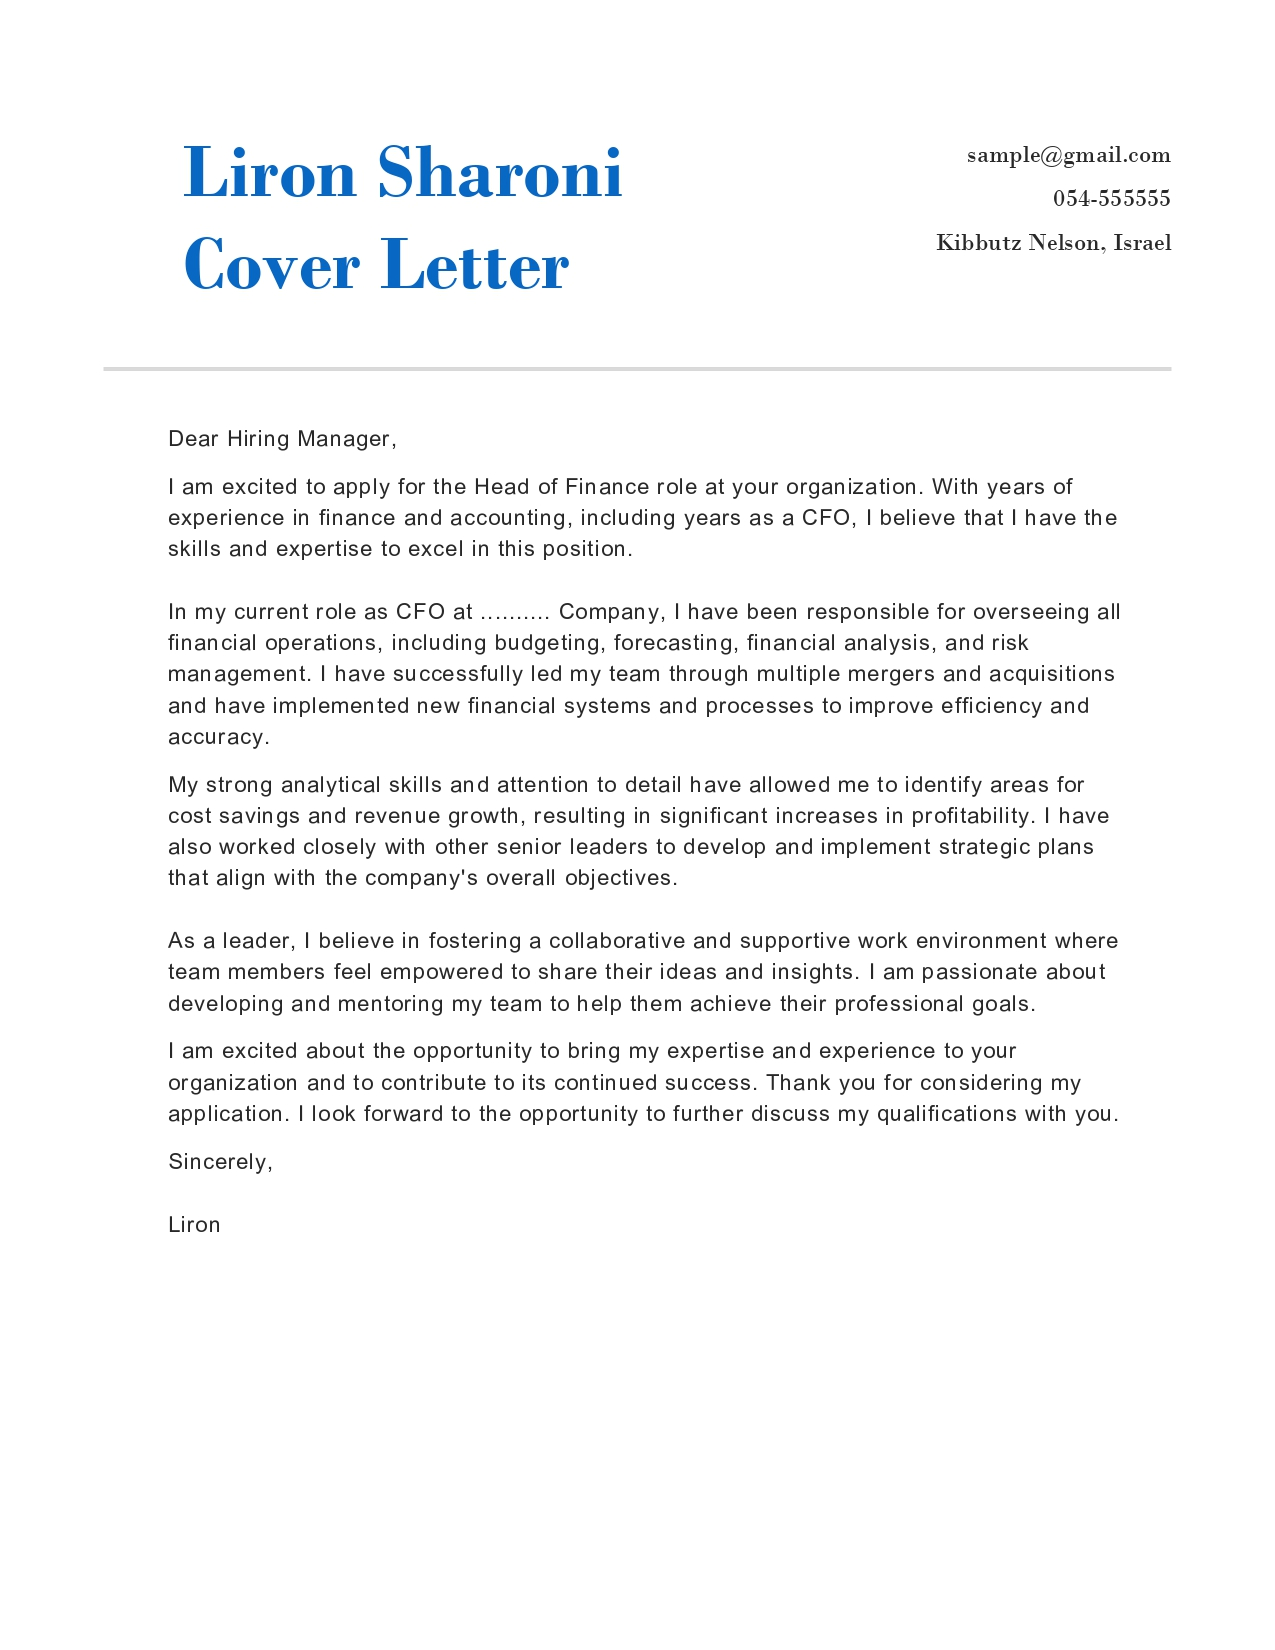 liron-sharoni-cover-letter-page-0001-1